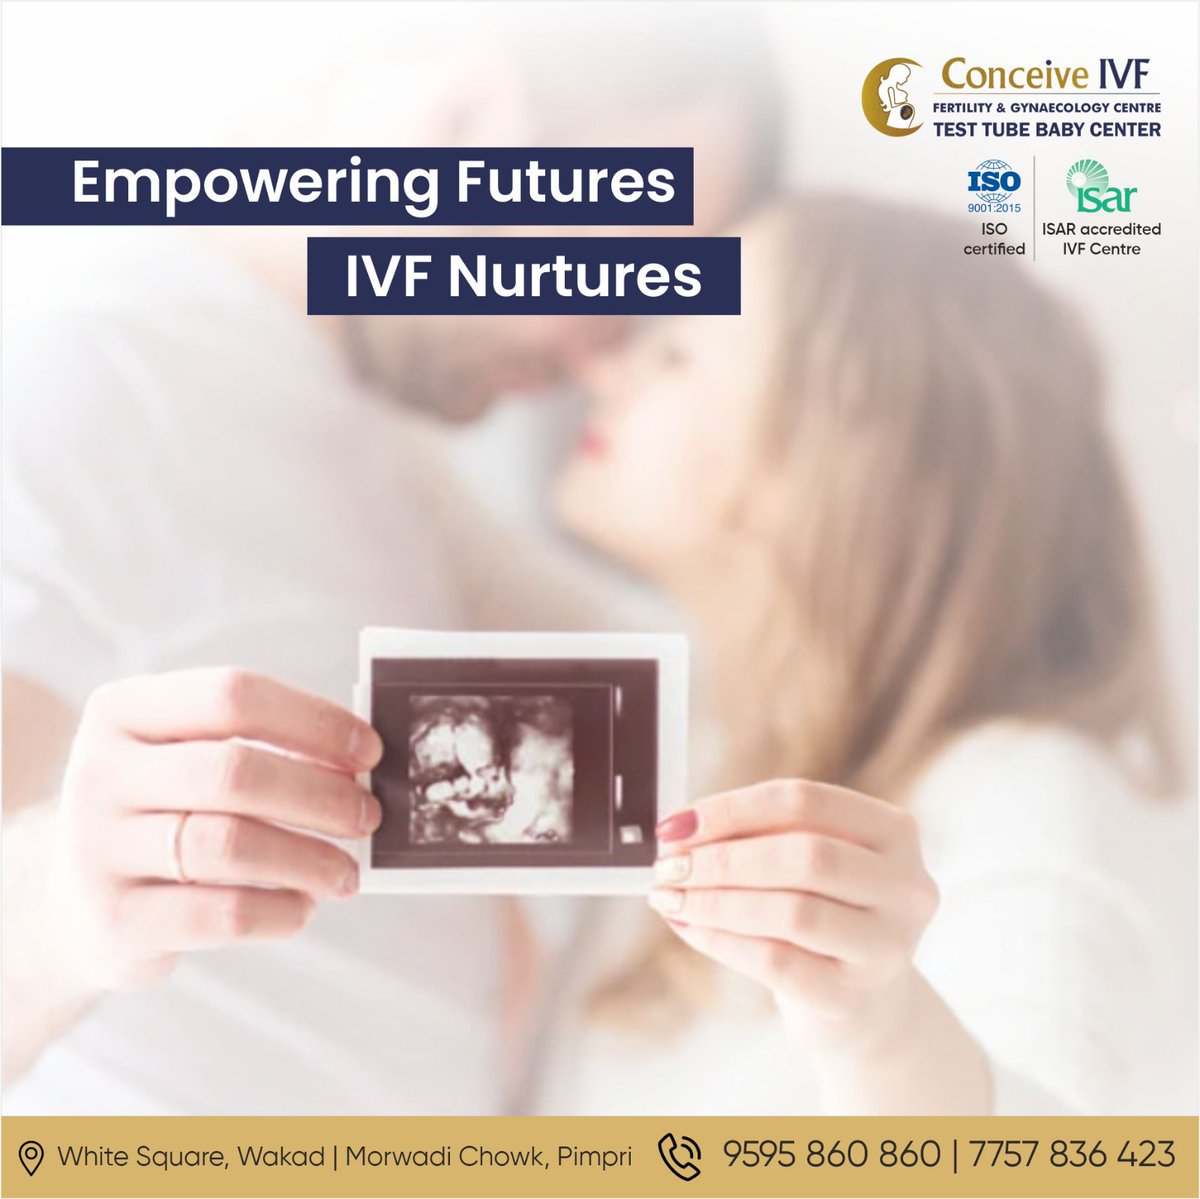 We know the journey to parenthood is not always easy. But with Conceive IVF, we will be with you every step of the way. 

#ConceiveIVF #InfertilitySupport #punetimesmirror #GynecologicalHealth #ivf #fertilitytreatment #womenhealth #pune